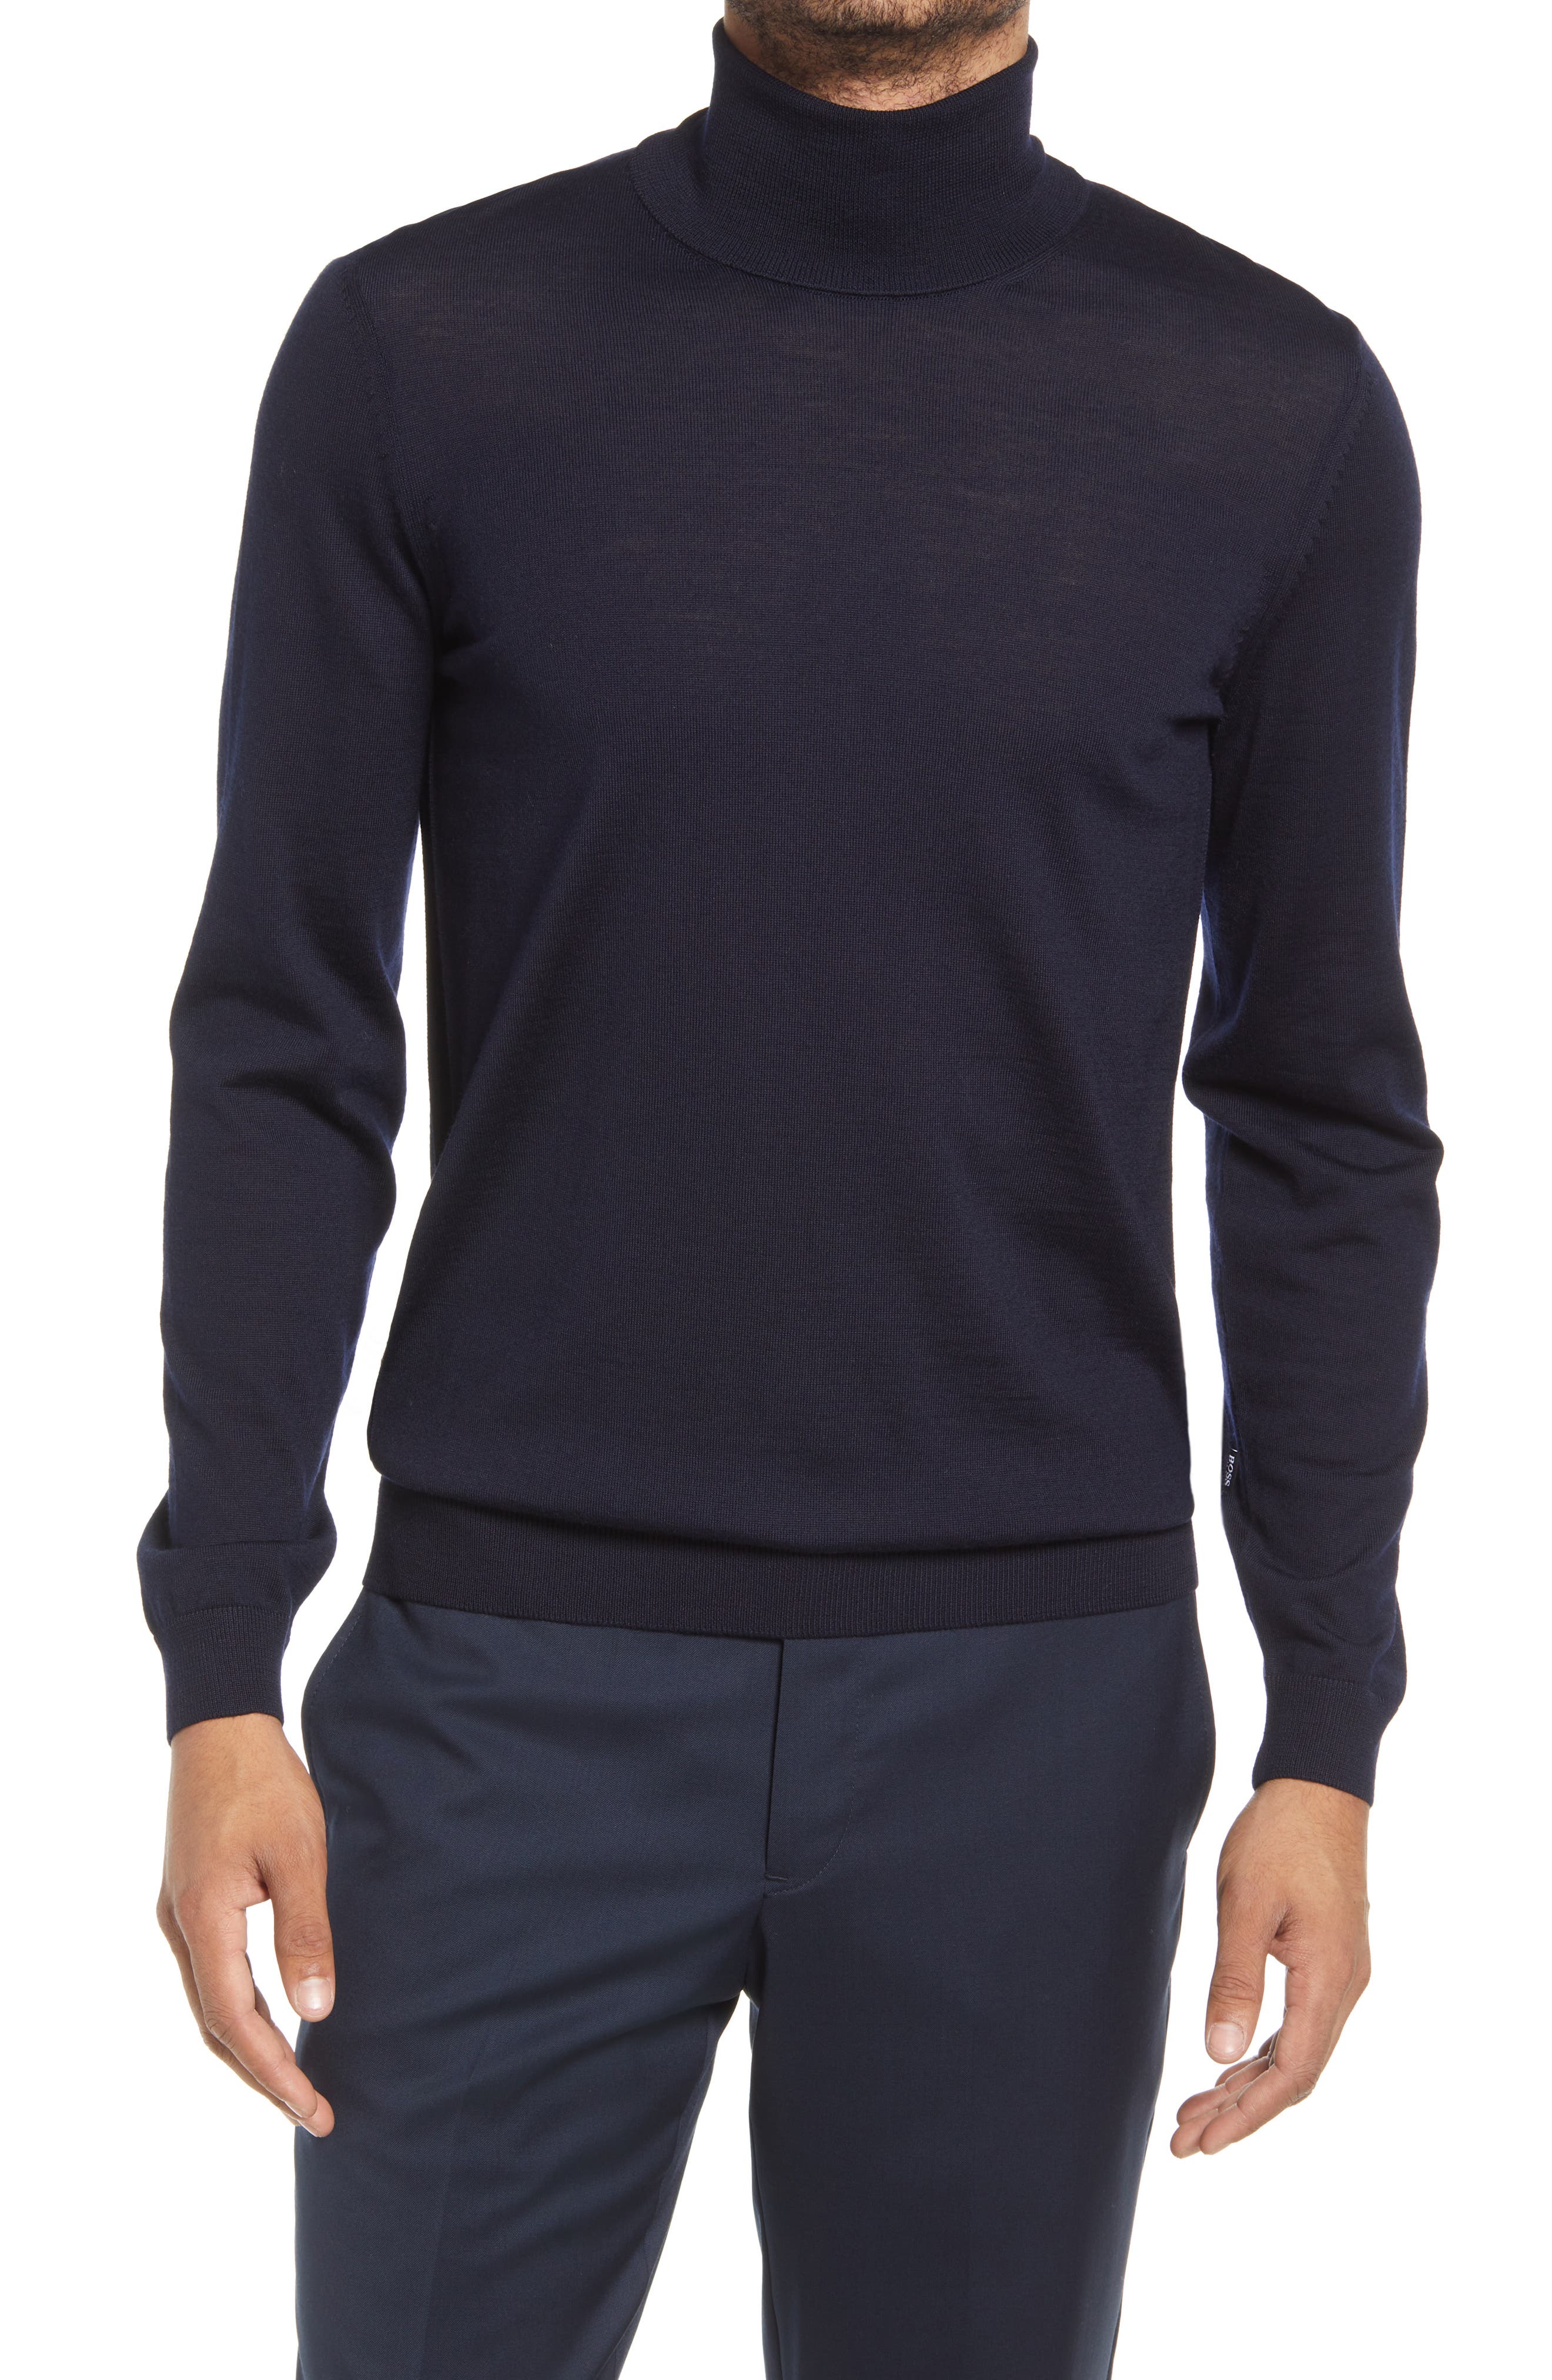 newrong Mens Turtleneck Knitted Jumper Sweater